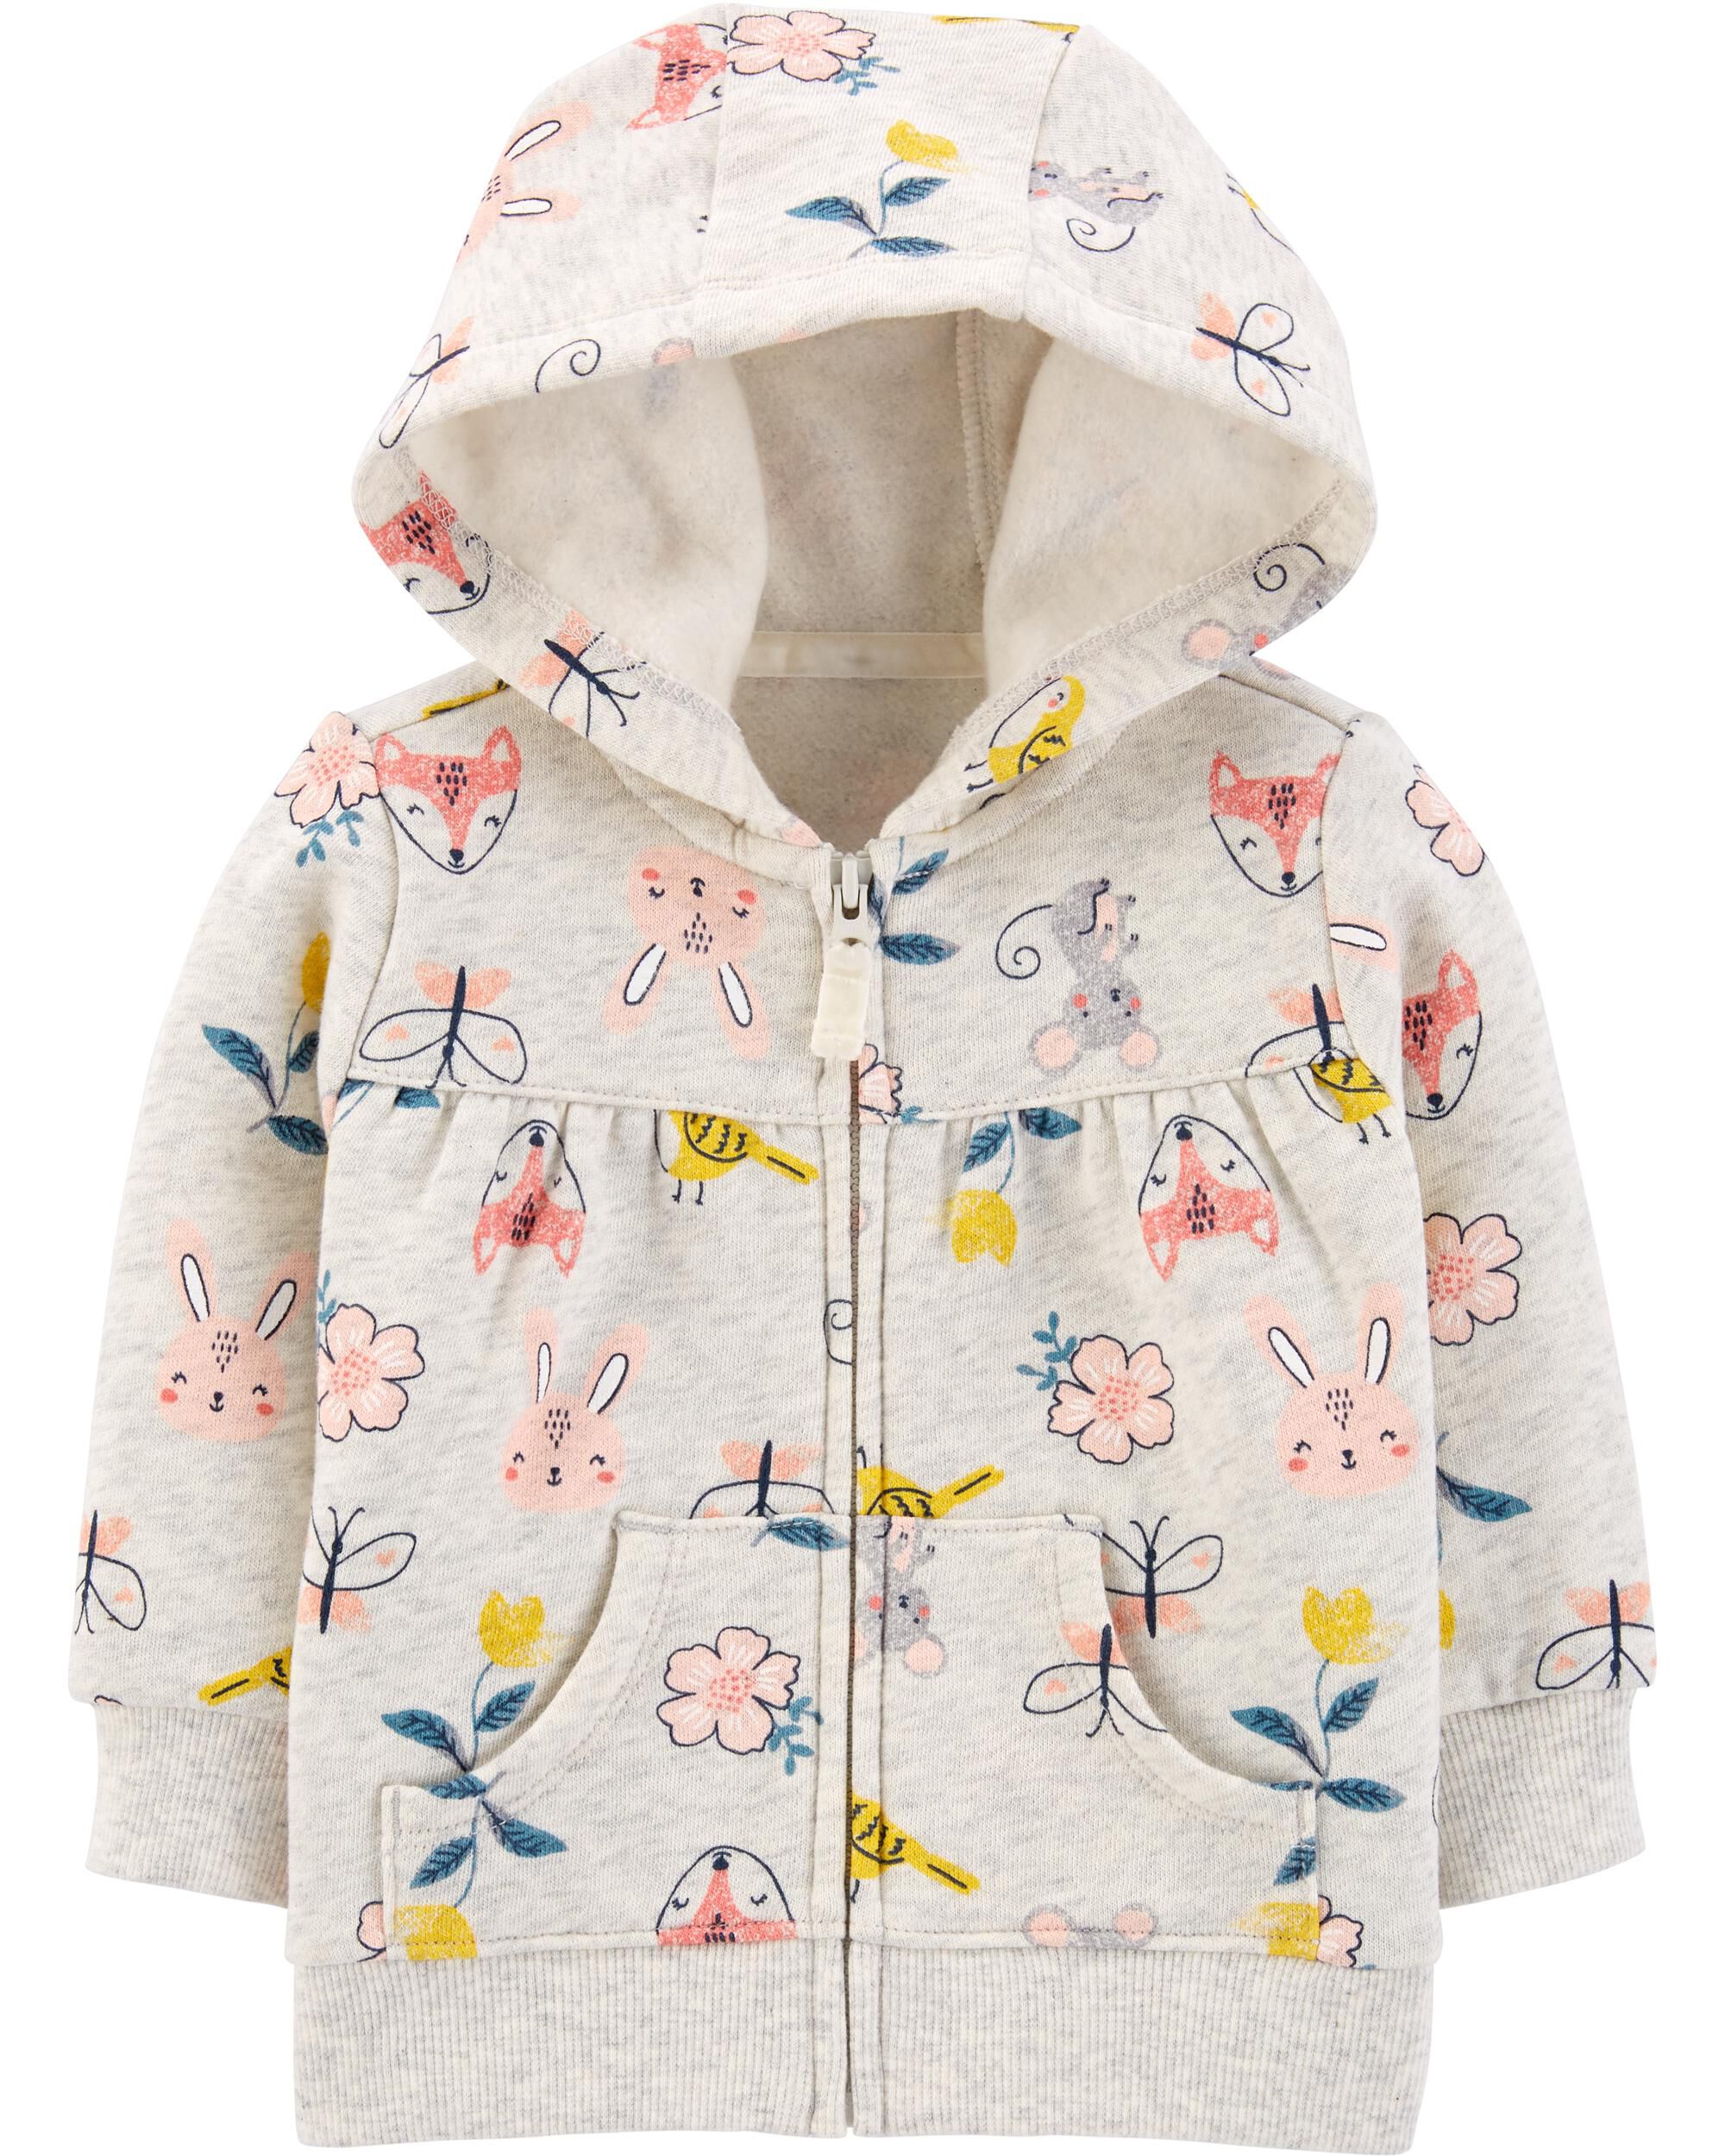 carters baby girl clothes on sale